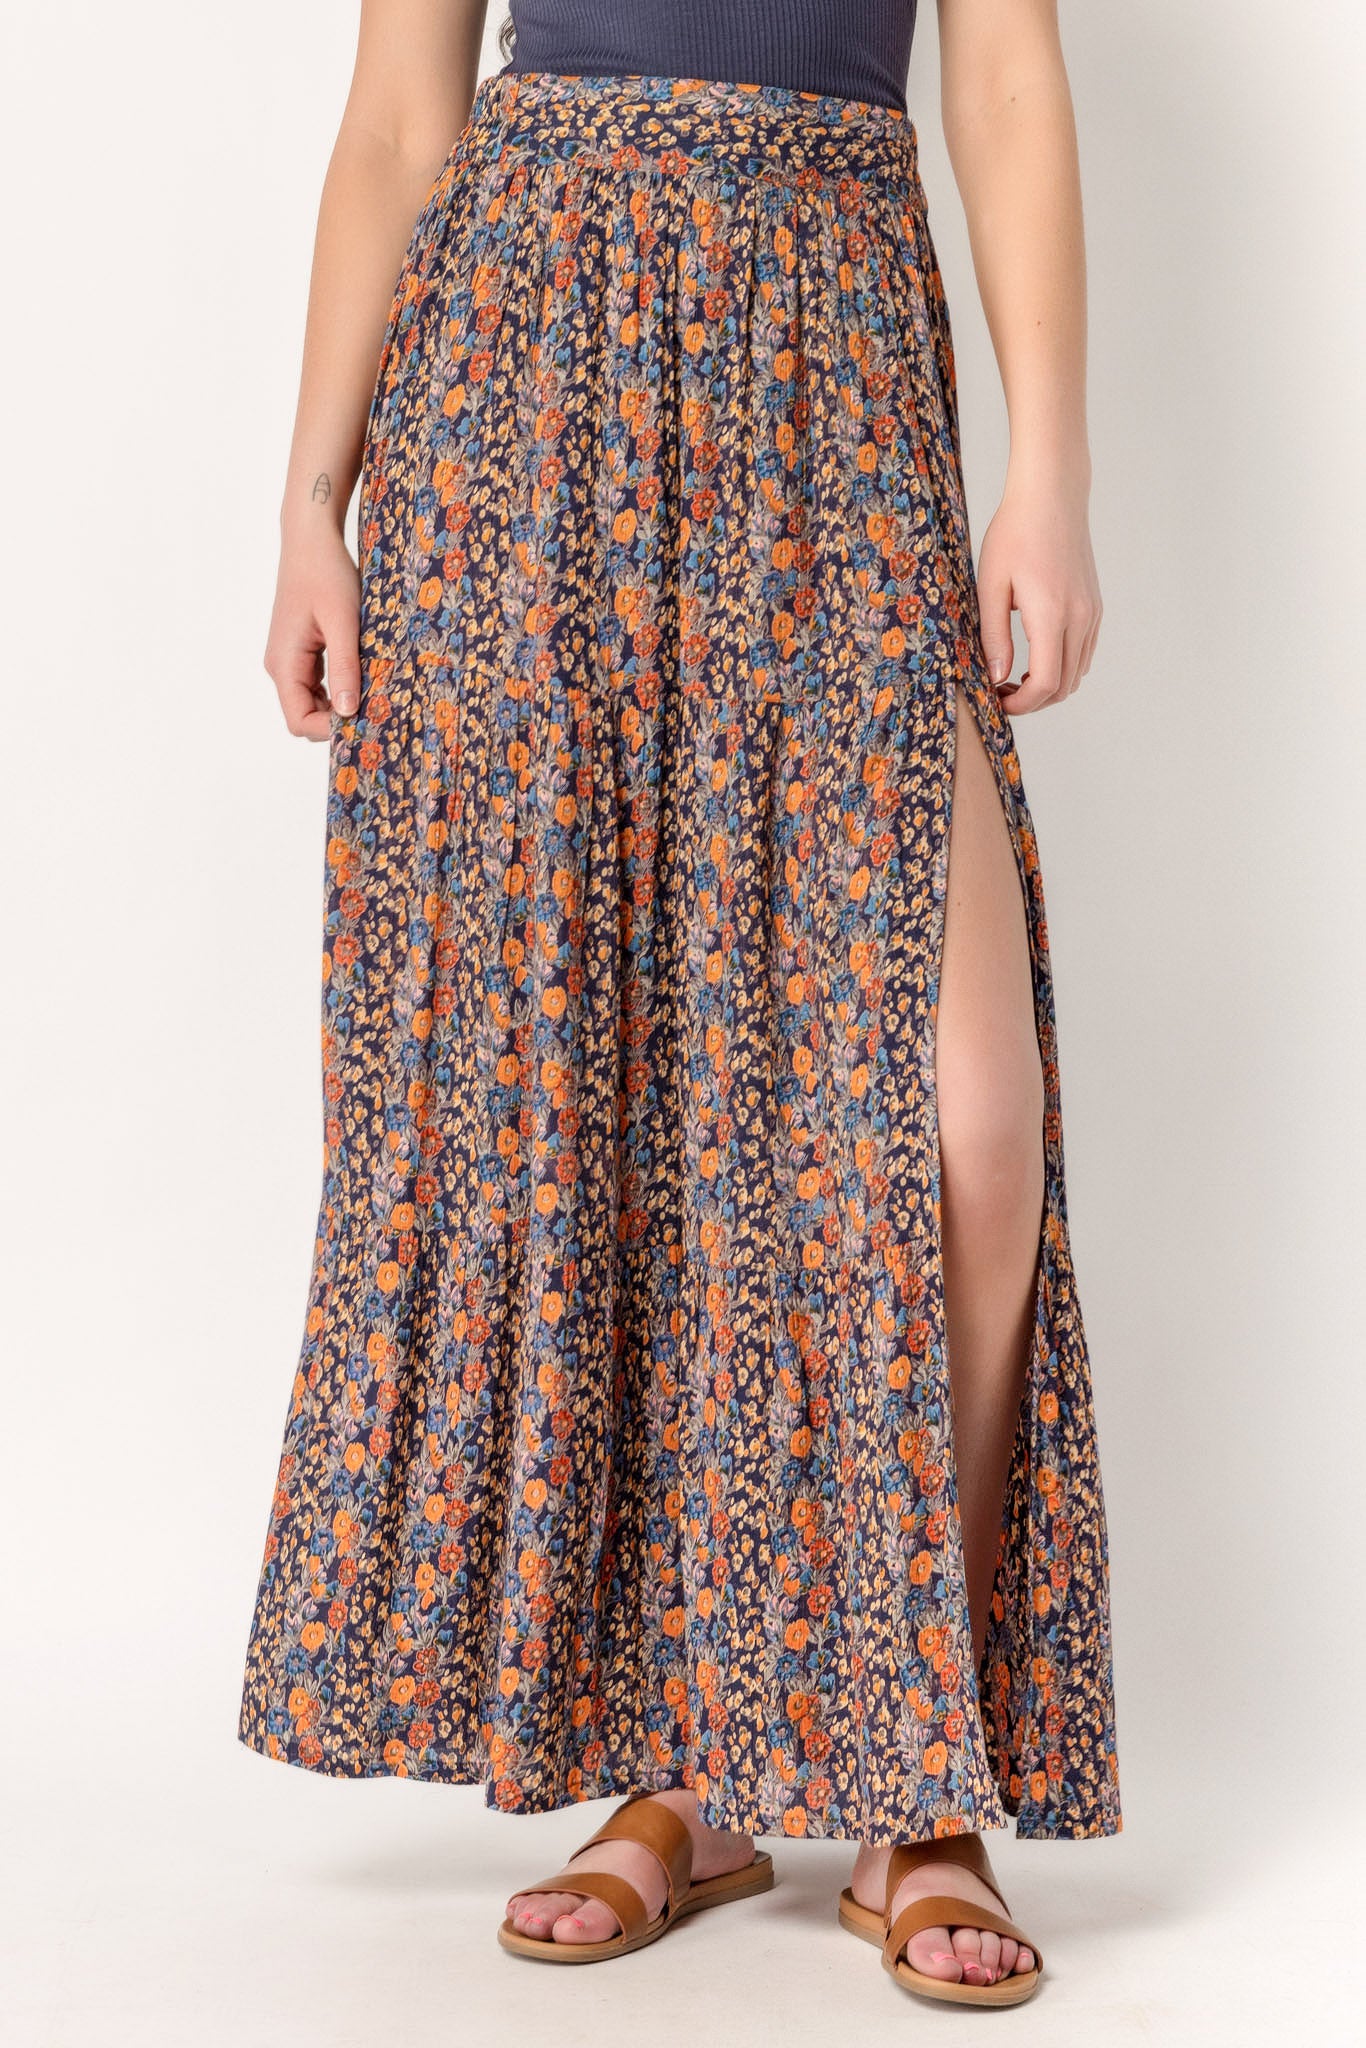 Ditsy Peasant Skirt with Slit